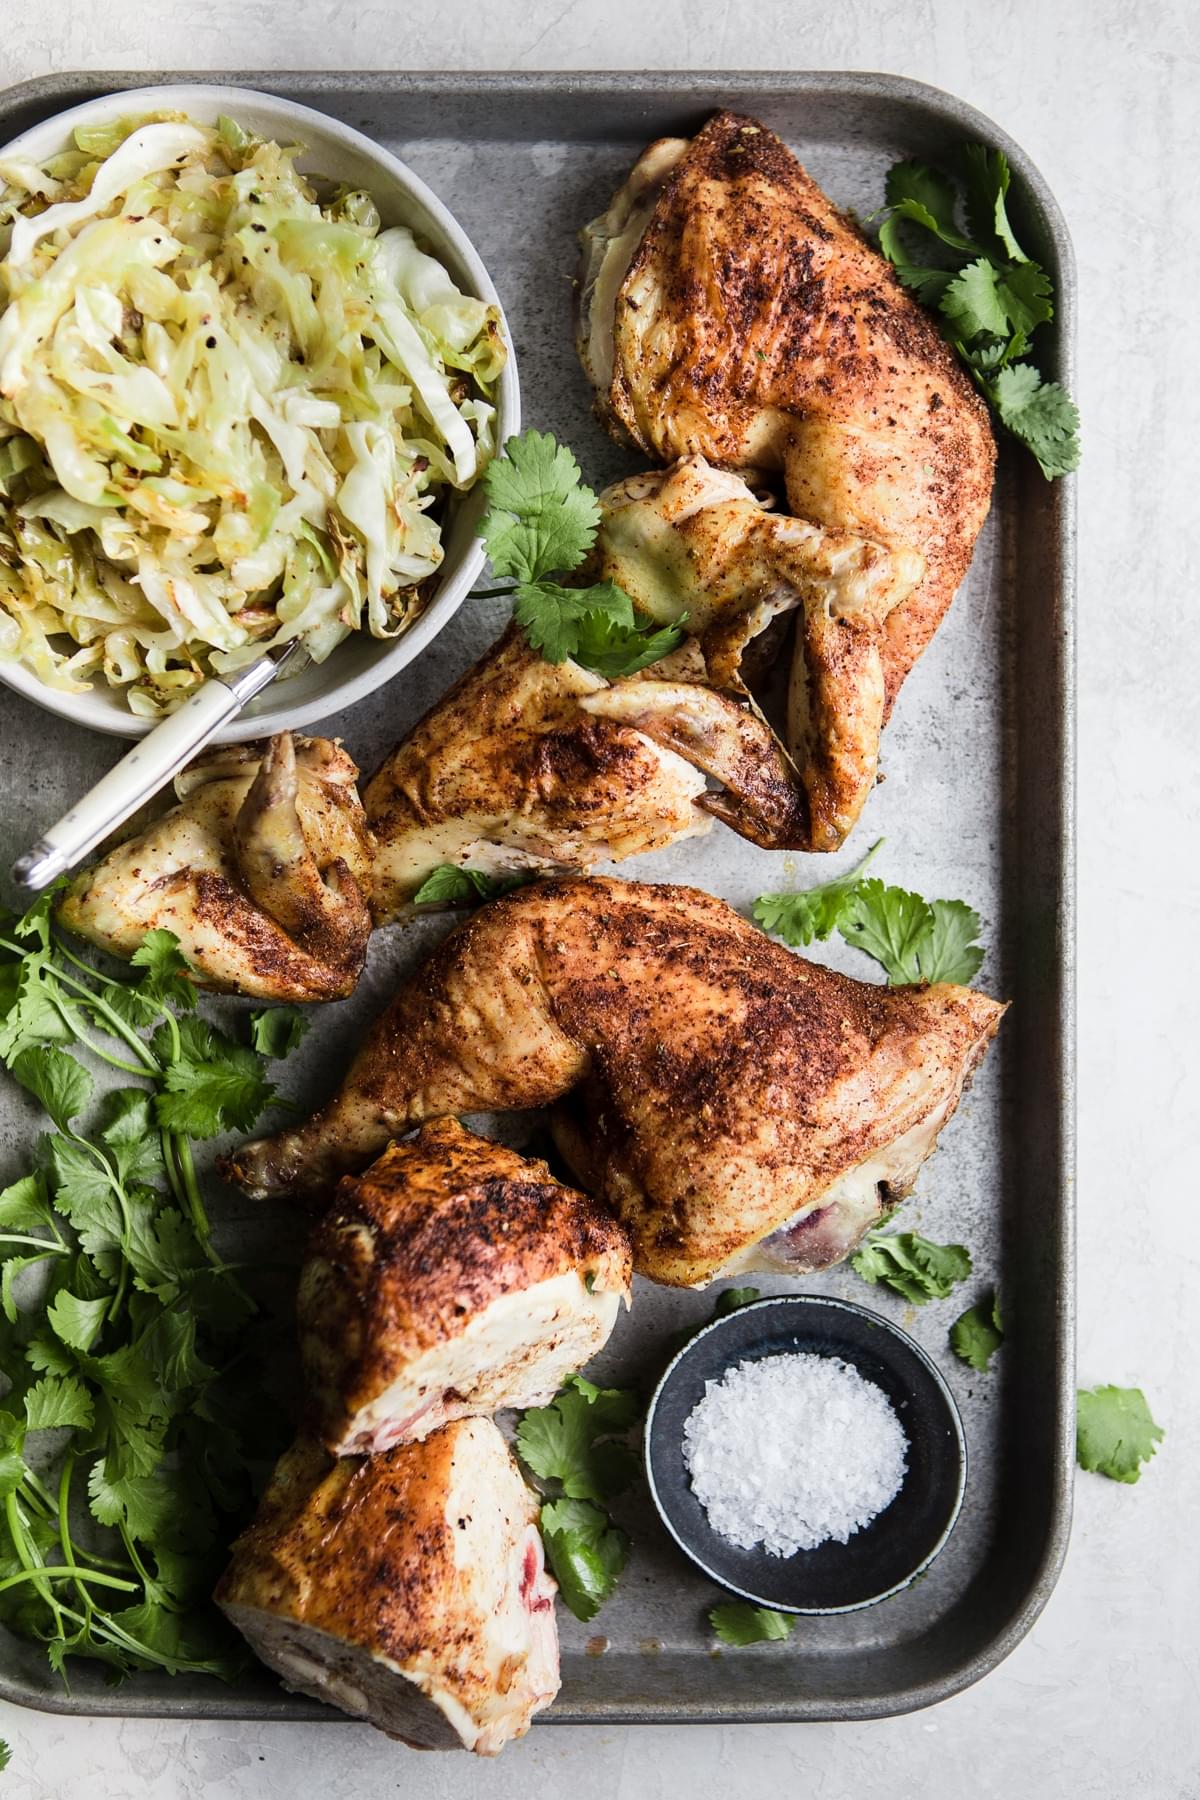 Whole30 approved Roasted Chicken With Cabbage